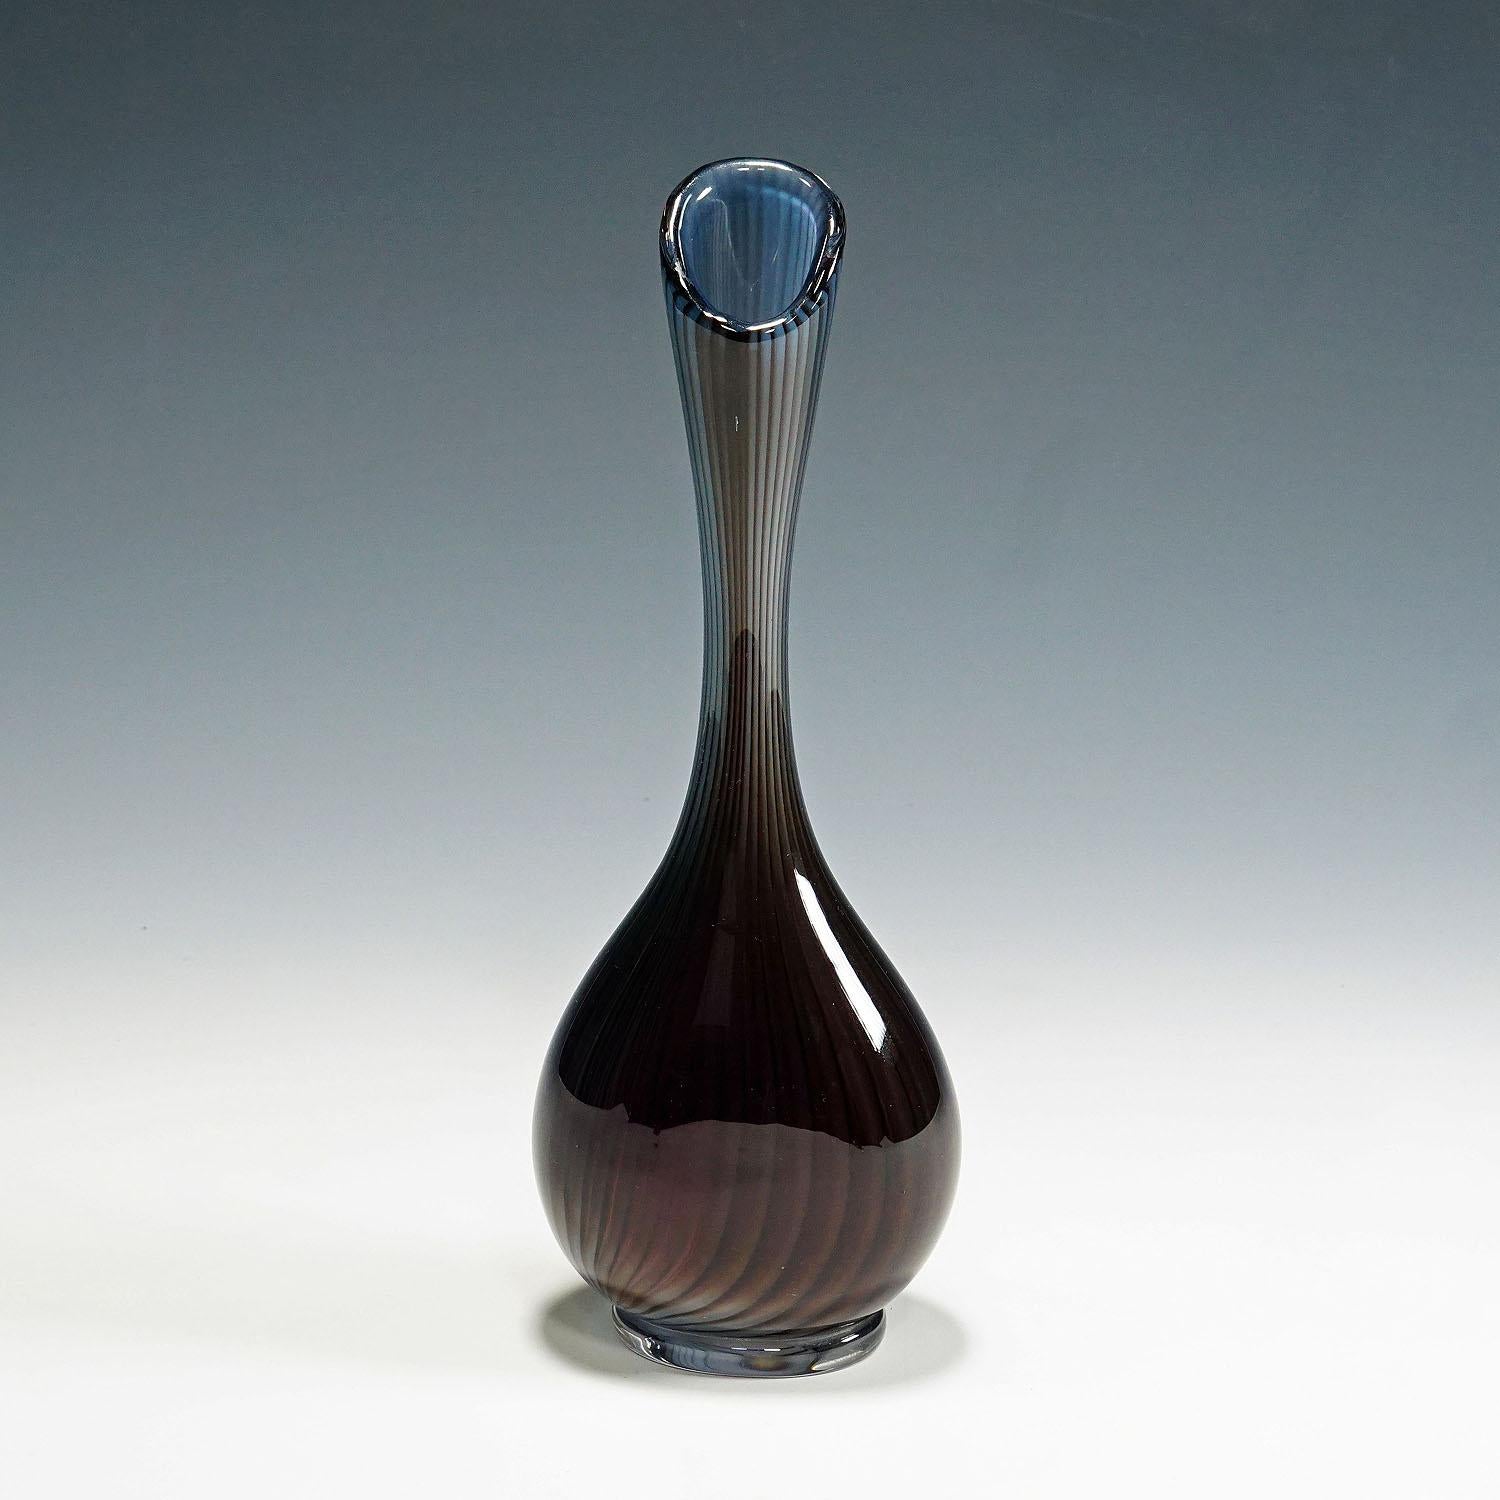 Large Colora vase by Vicke Lindstrand for Kosta 1953.

Art glass vase of the Colora series, designed by Vicke Lindstrand for Kosta Glassworks. This particular piece is an early work from the Colora series, which first appeared in the Kosta catalogue